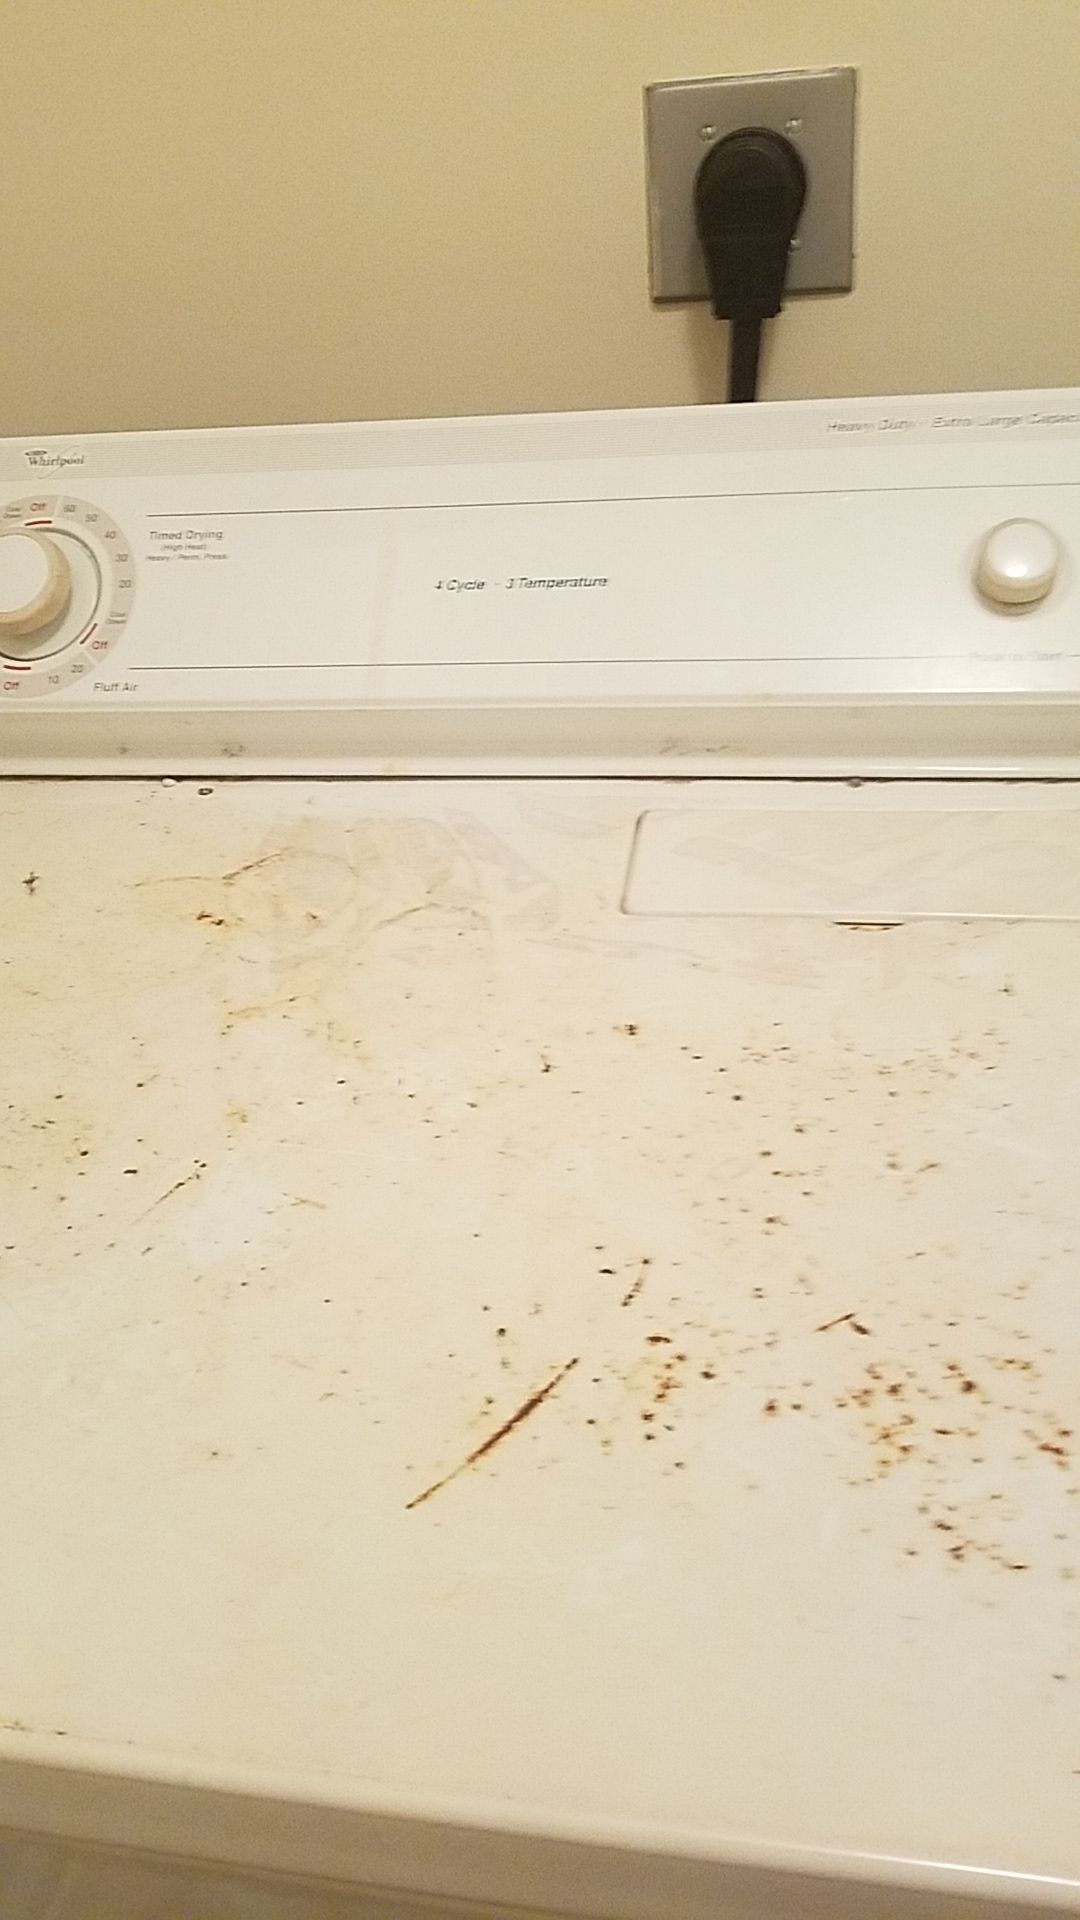 Whirlpool heavy duty washer and dryer